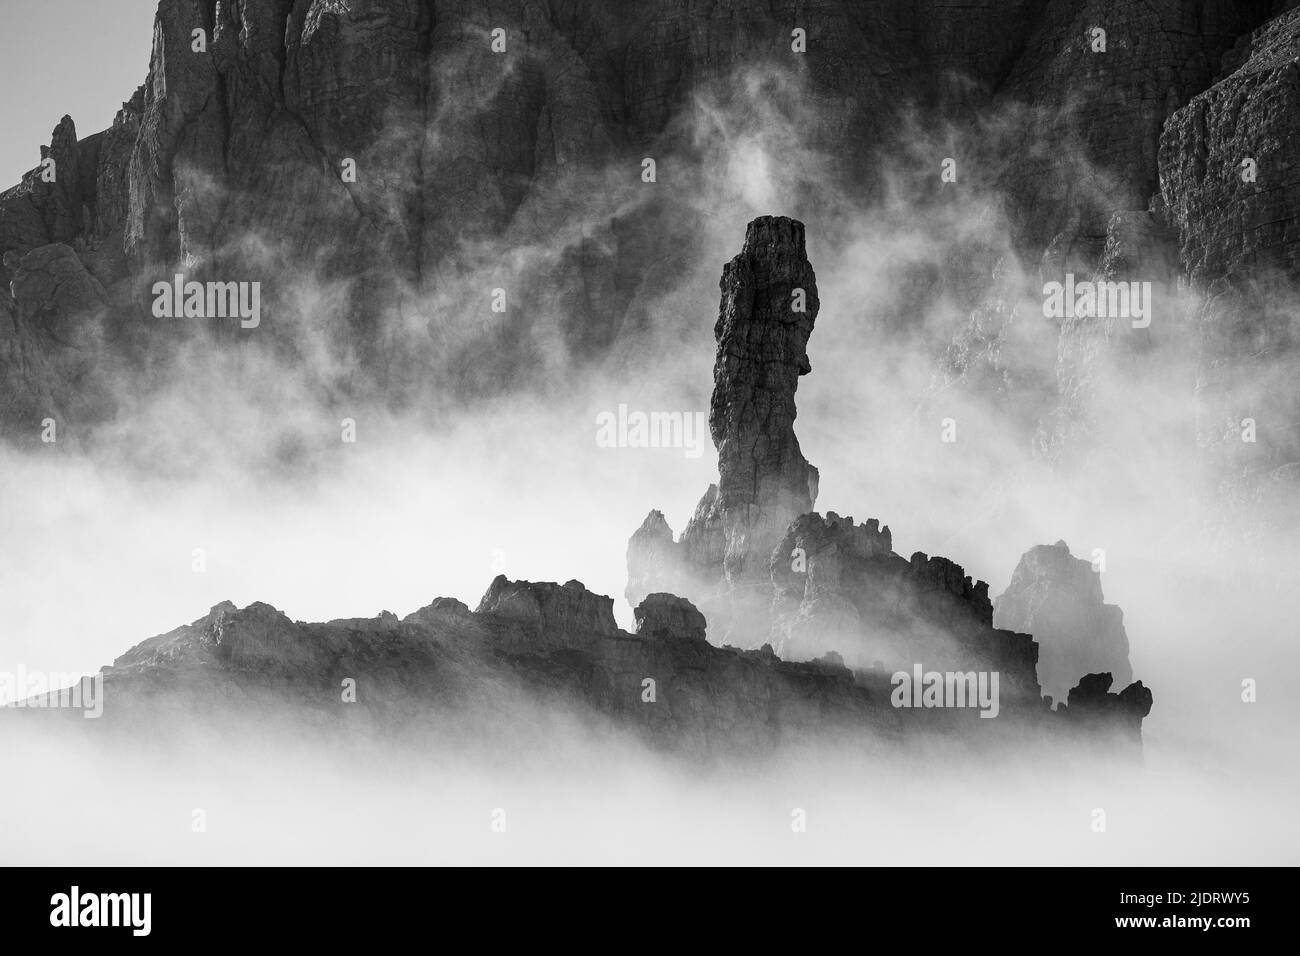 Sunlight at sunrise. Rocky pinnacle and clouds. Monte Paterno mountain in the Sexten Dolomites. Italian Alps. Europe. Black white landscape. Stock Photo